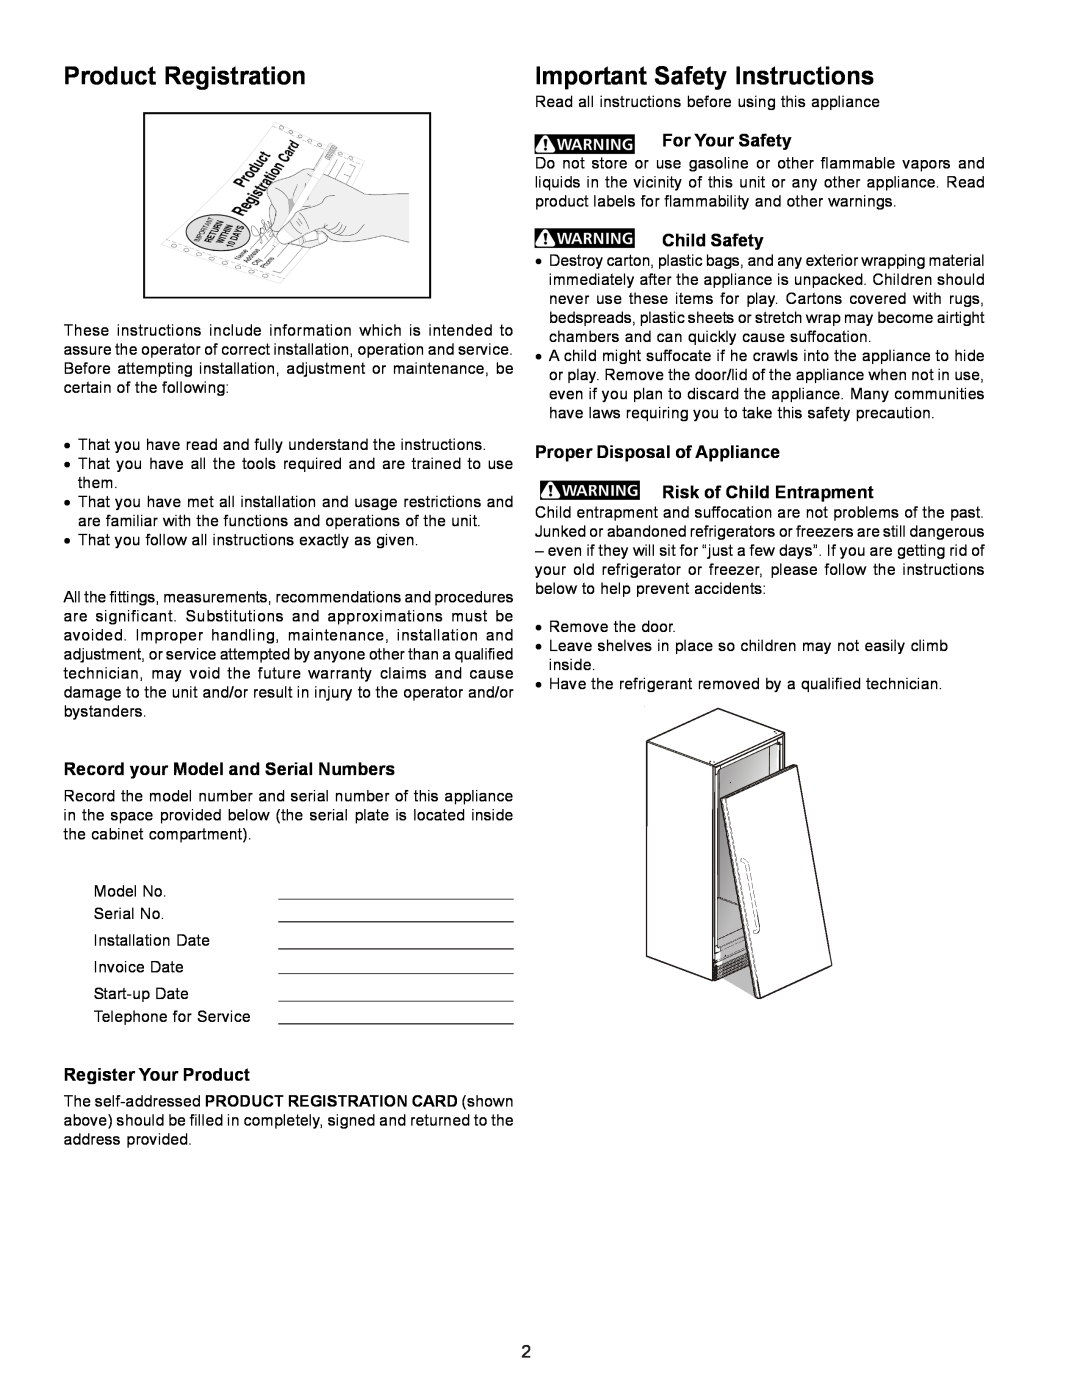 Frigidaire GLASS DOOR REFRIGERATOR Product Registration, Important Safety Instructions, For Your Safety, Child Safety 